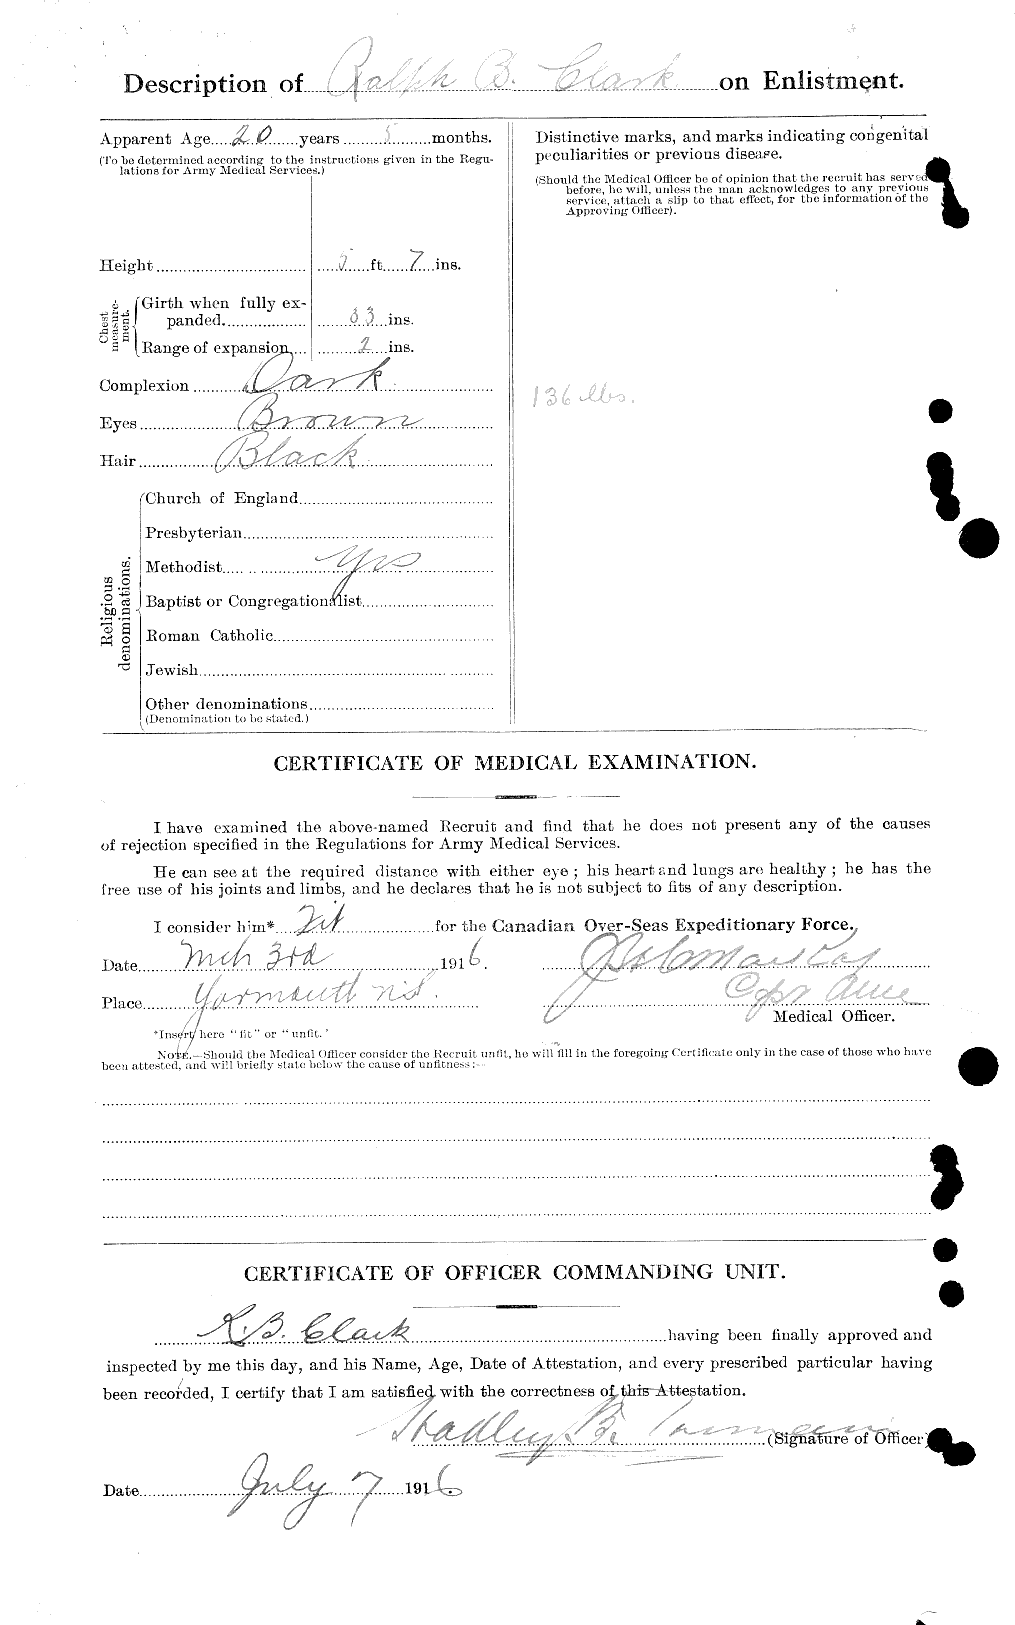 Personnel Records of the First World War - CEF 023493b